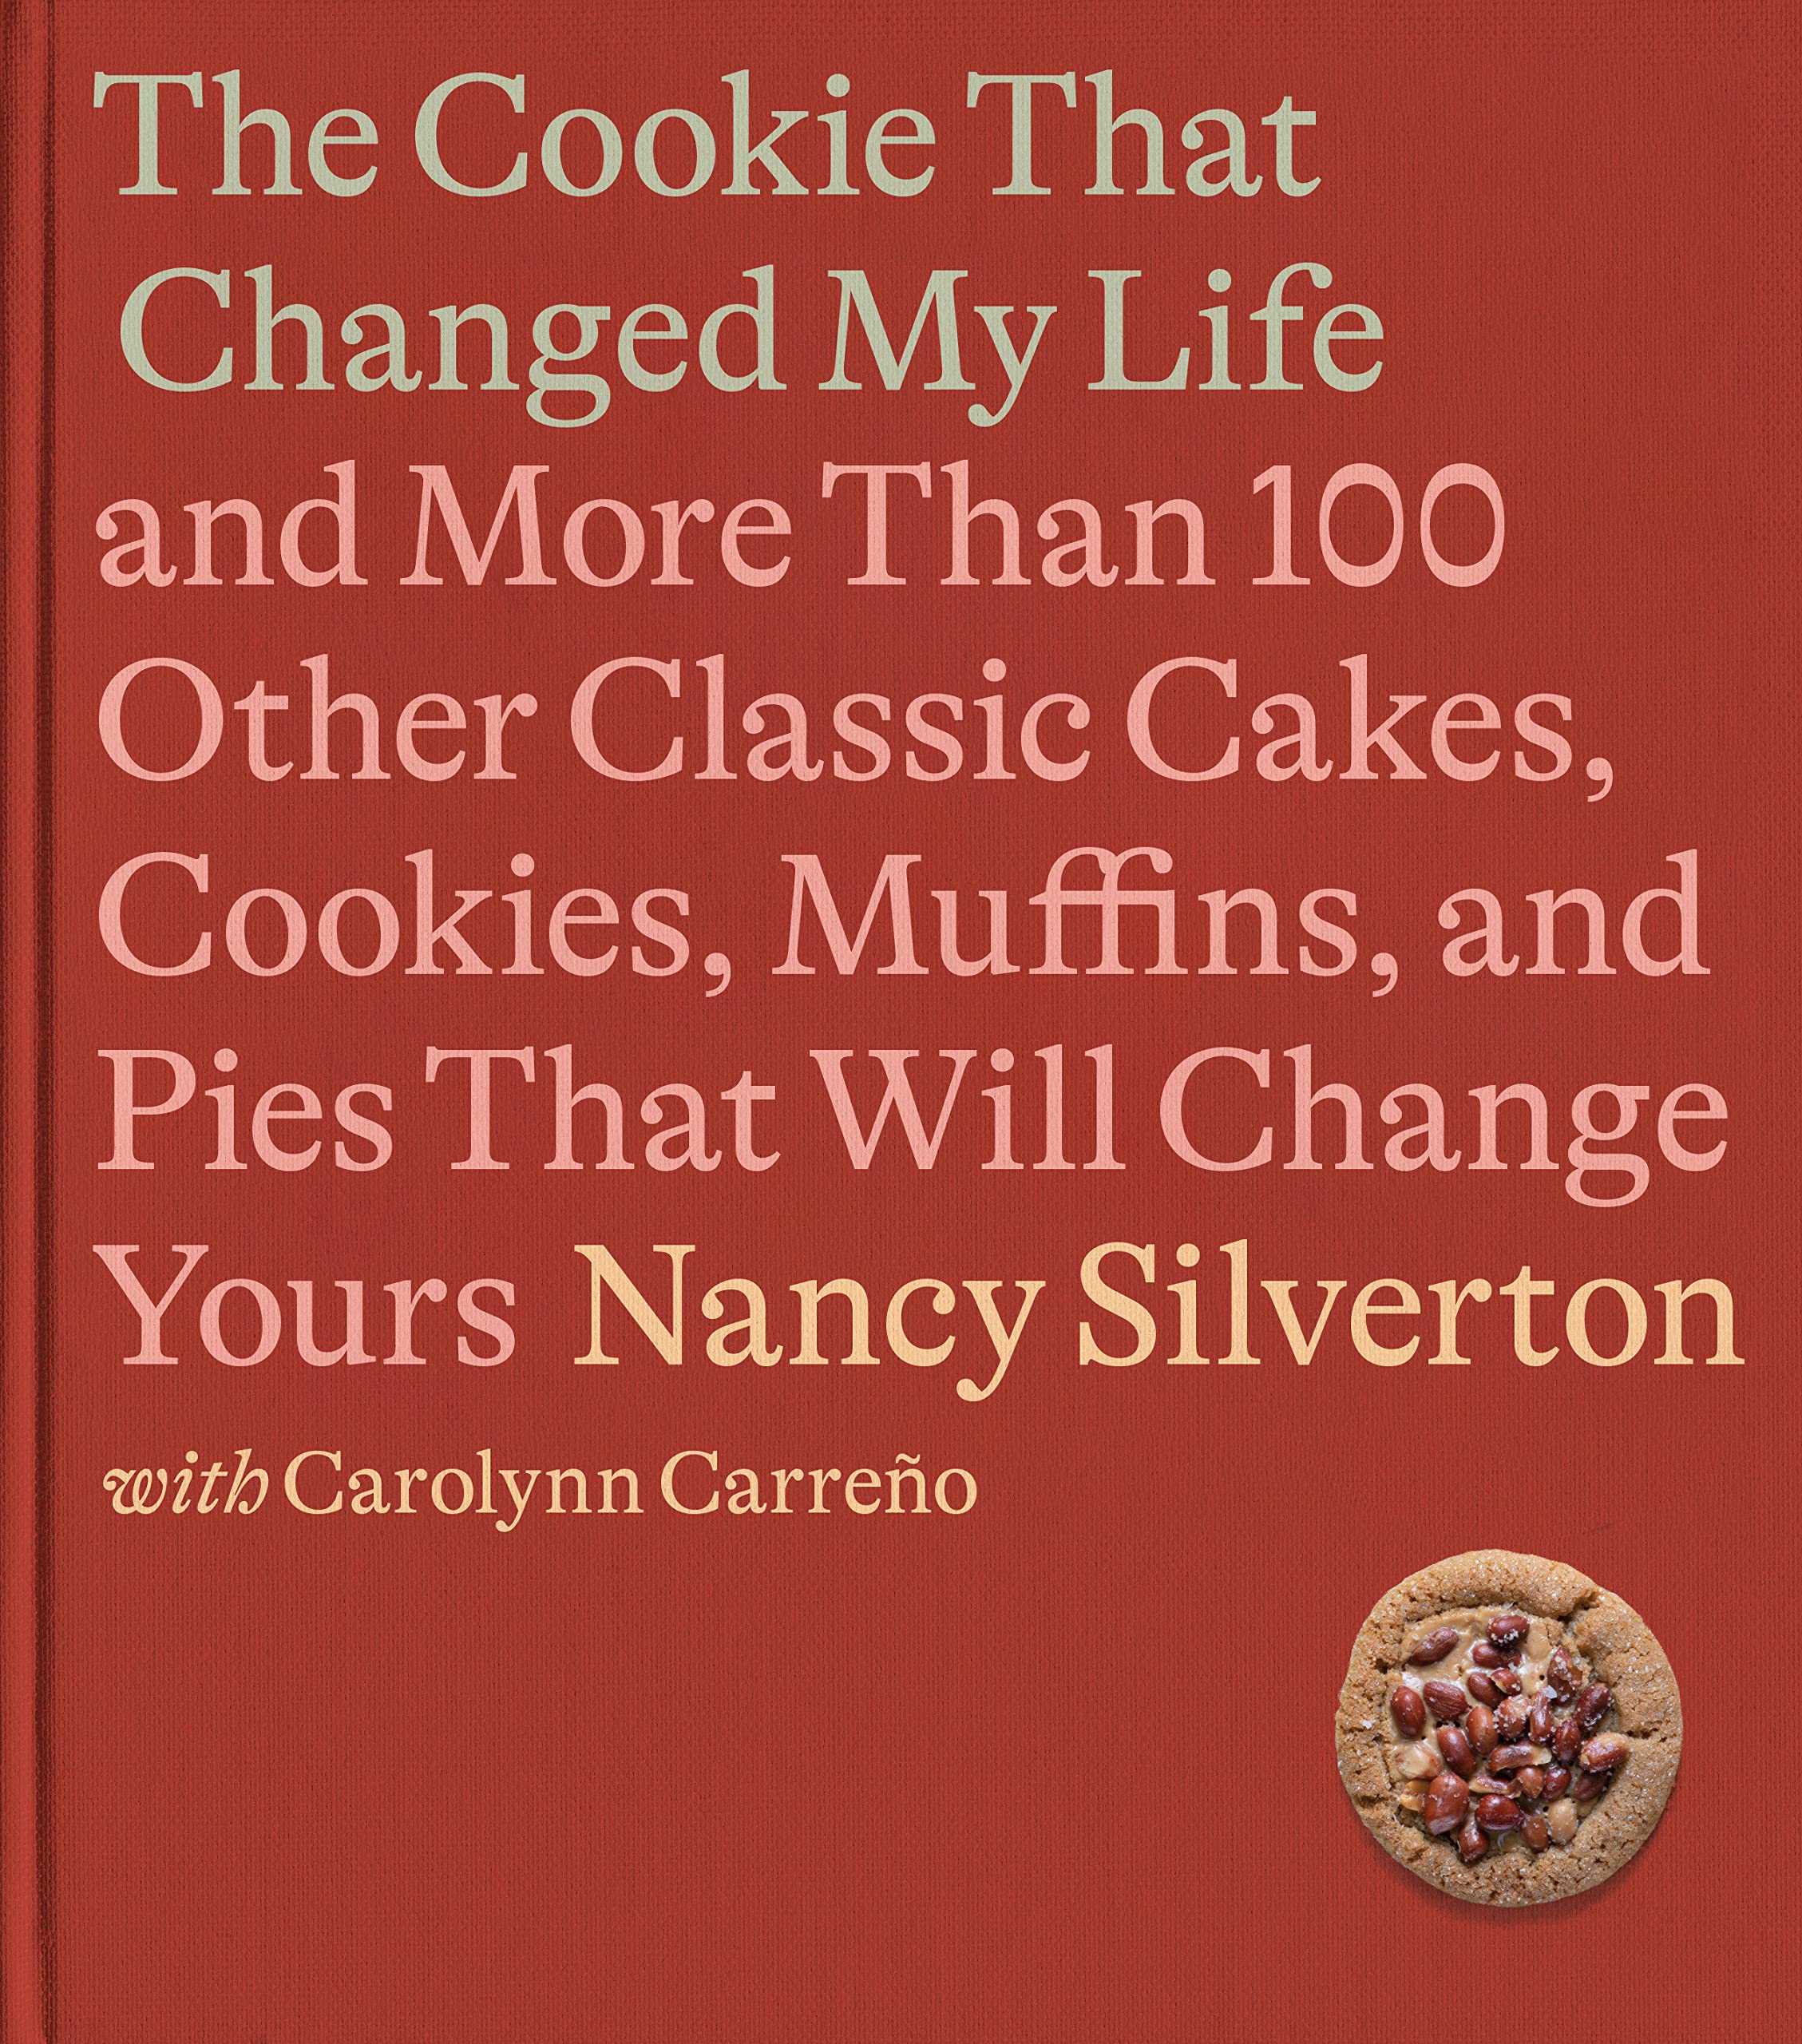 The Cookie That Changed My Life And More Than 100 Other Classic Cakes, Cookies, Muffins,  and Pies That Will Change Yours (Nancy Silverton, Carolynn Carreño) *Signed*